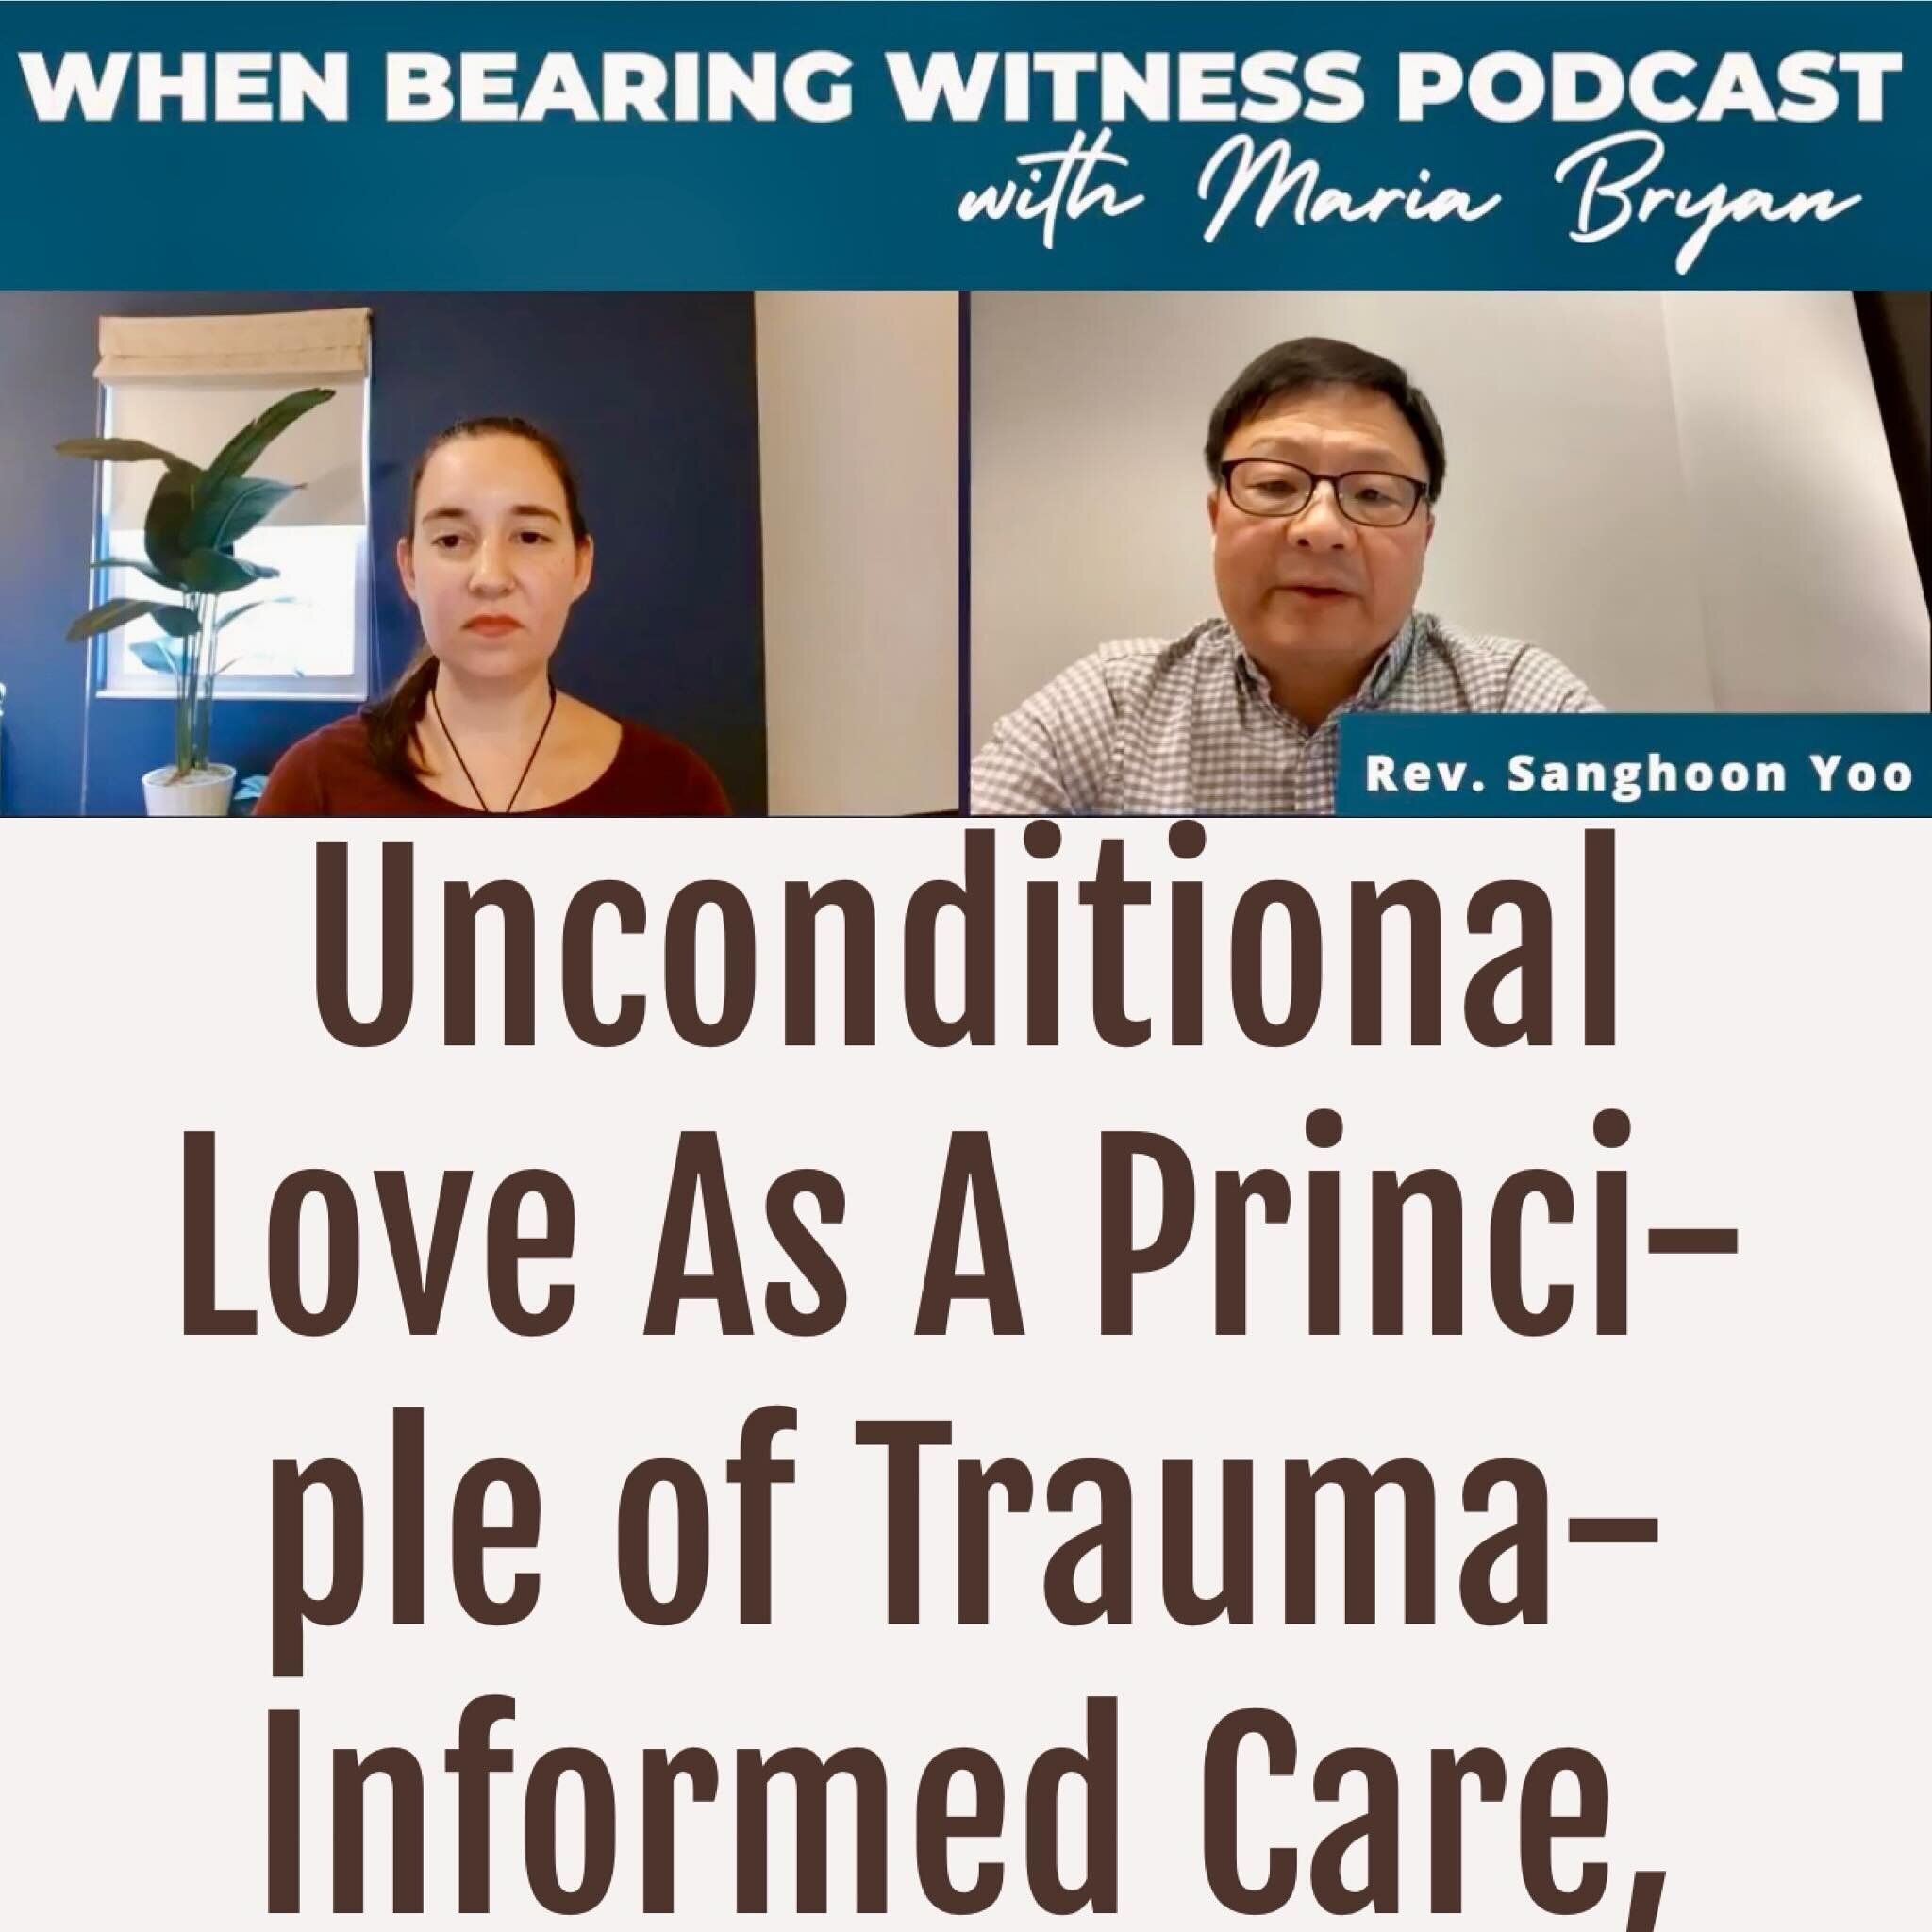 Maria Bryan podcast (3/19/24)
Unconditional Love as a Principle of Trauma-Informed Care - with Rev. Sanghoon Yoo

https://www.mariabryan.com/podcast/episode-6

From Maria Bryan 
When my daughter was born, I thought my heart would explode. I played wi